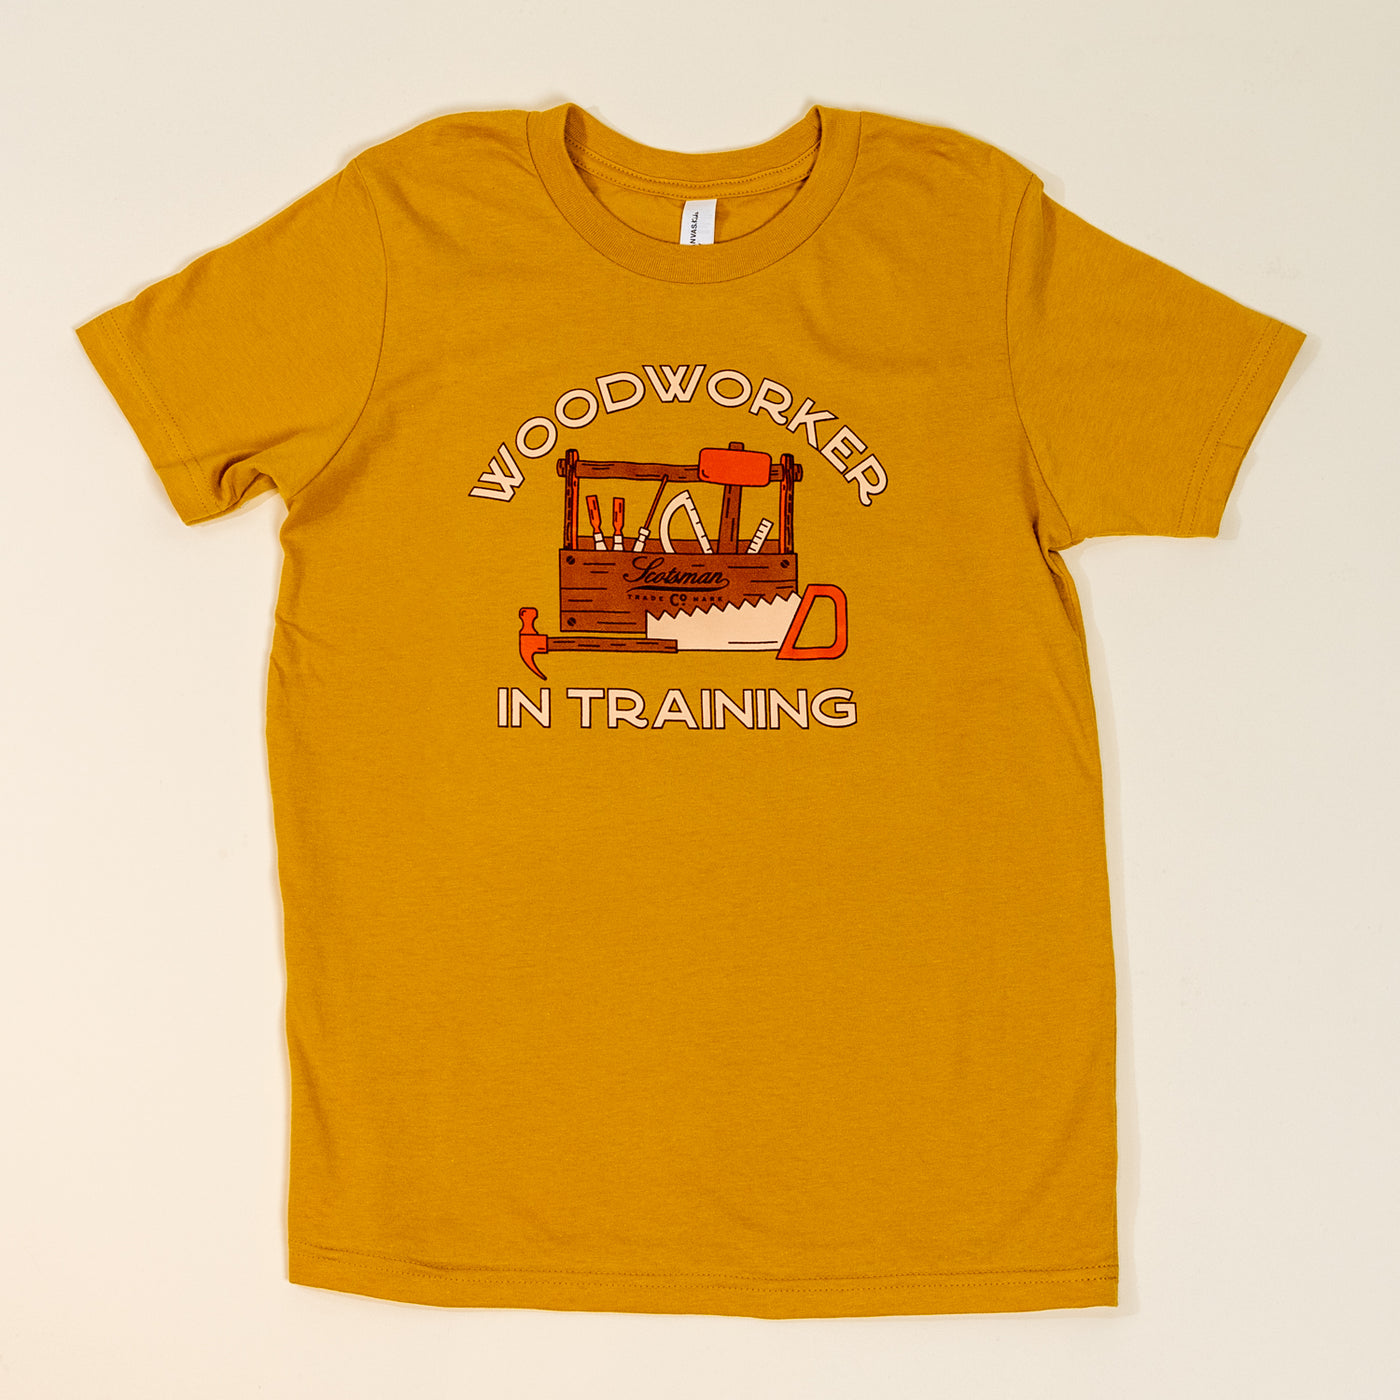 Woodworker in Training Youth T-Shirt